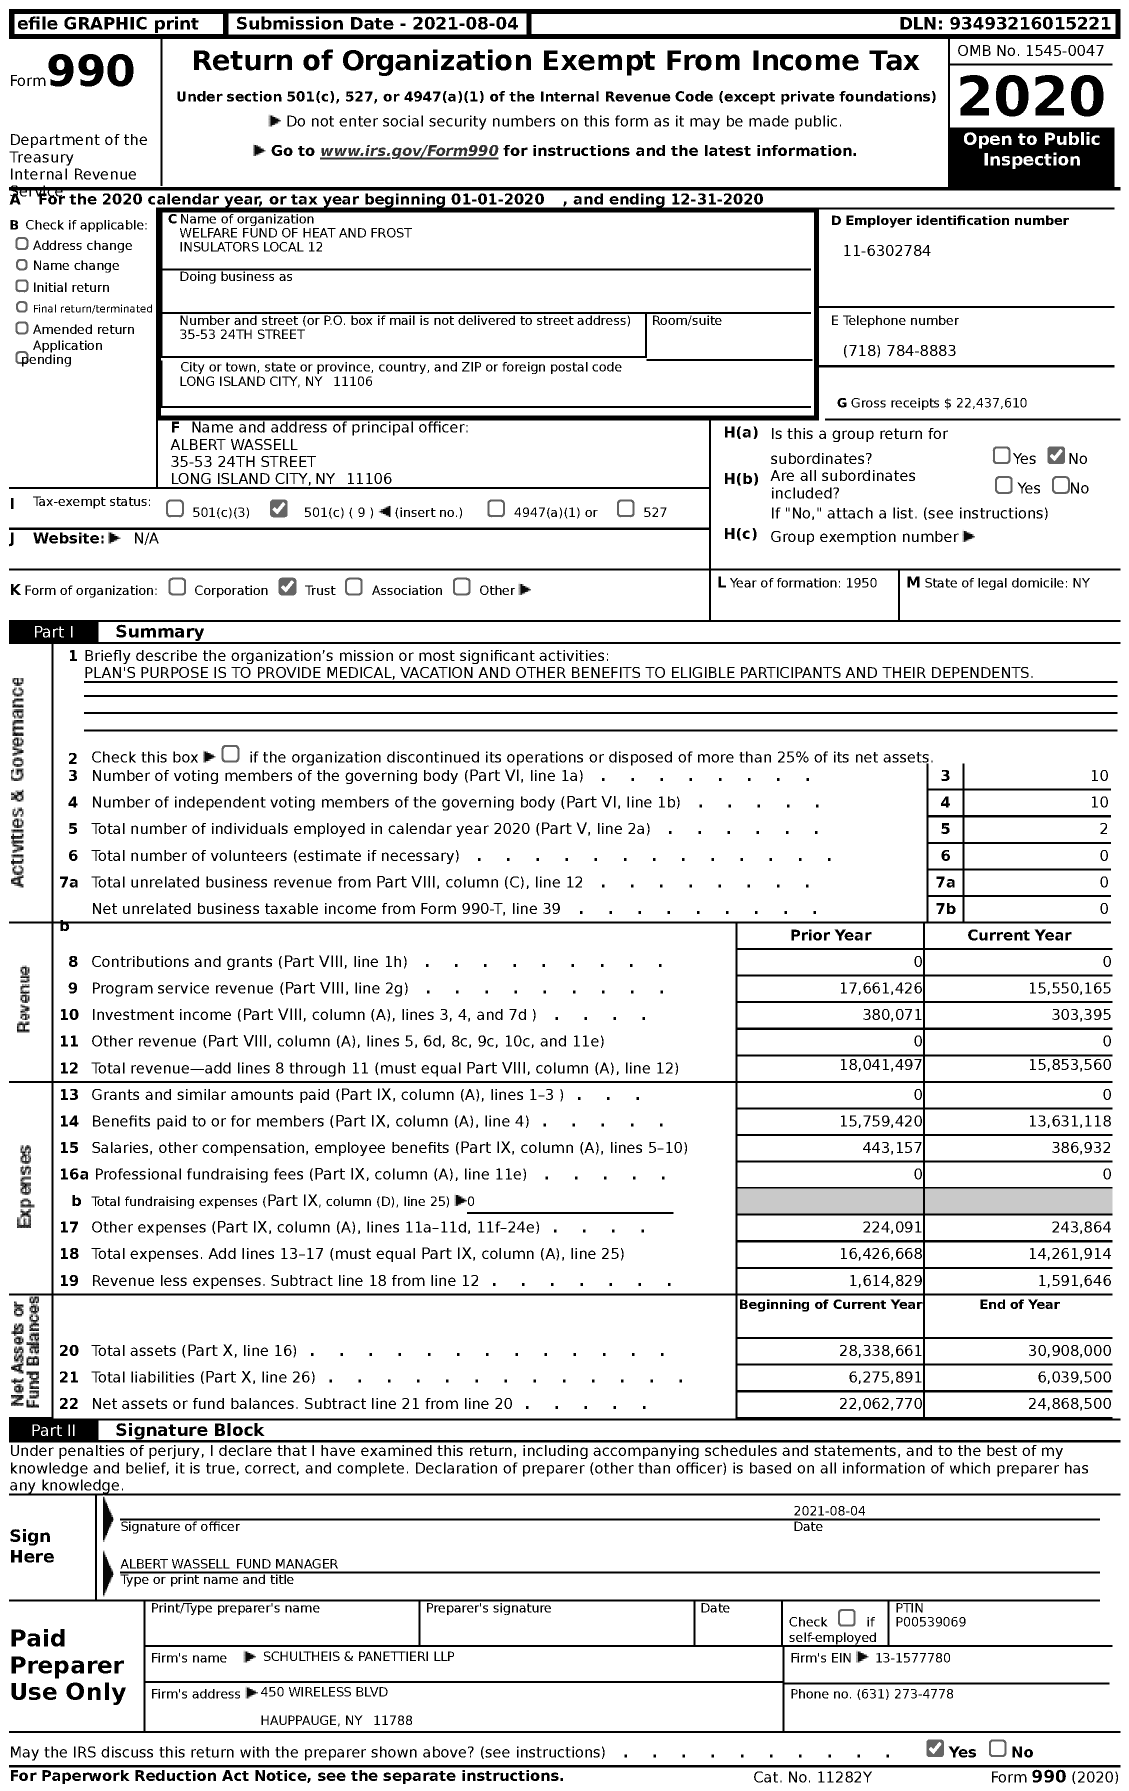 Image of first page of 2020 Form 990 for Welfare Fund of Heat and Frost Insulators Local 12